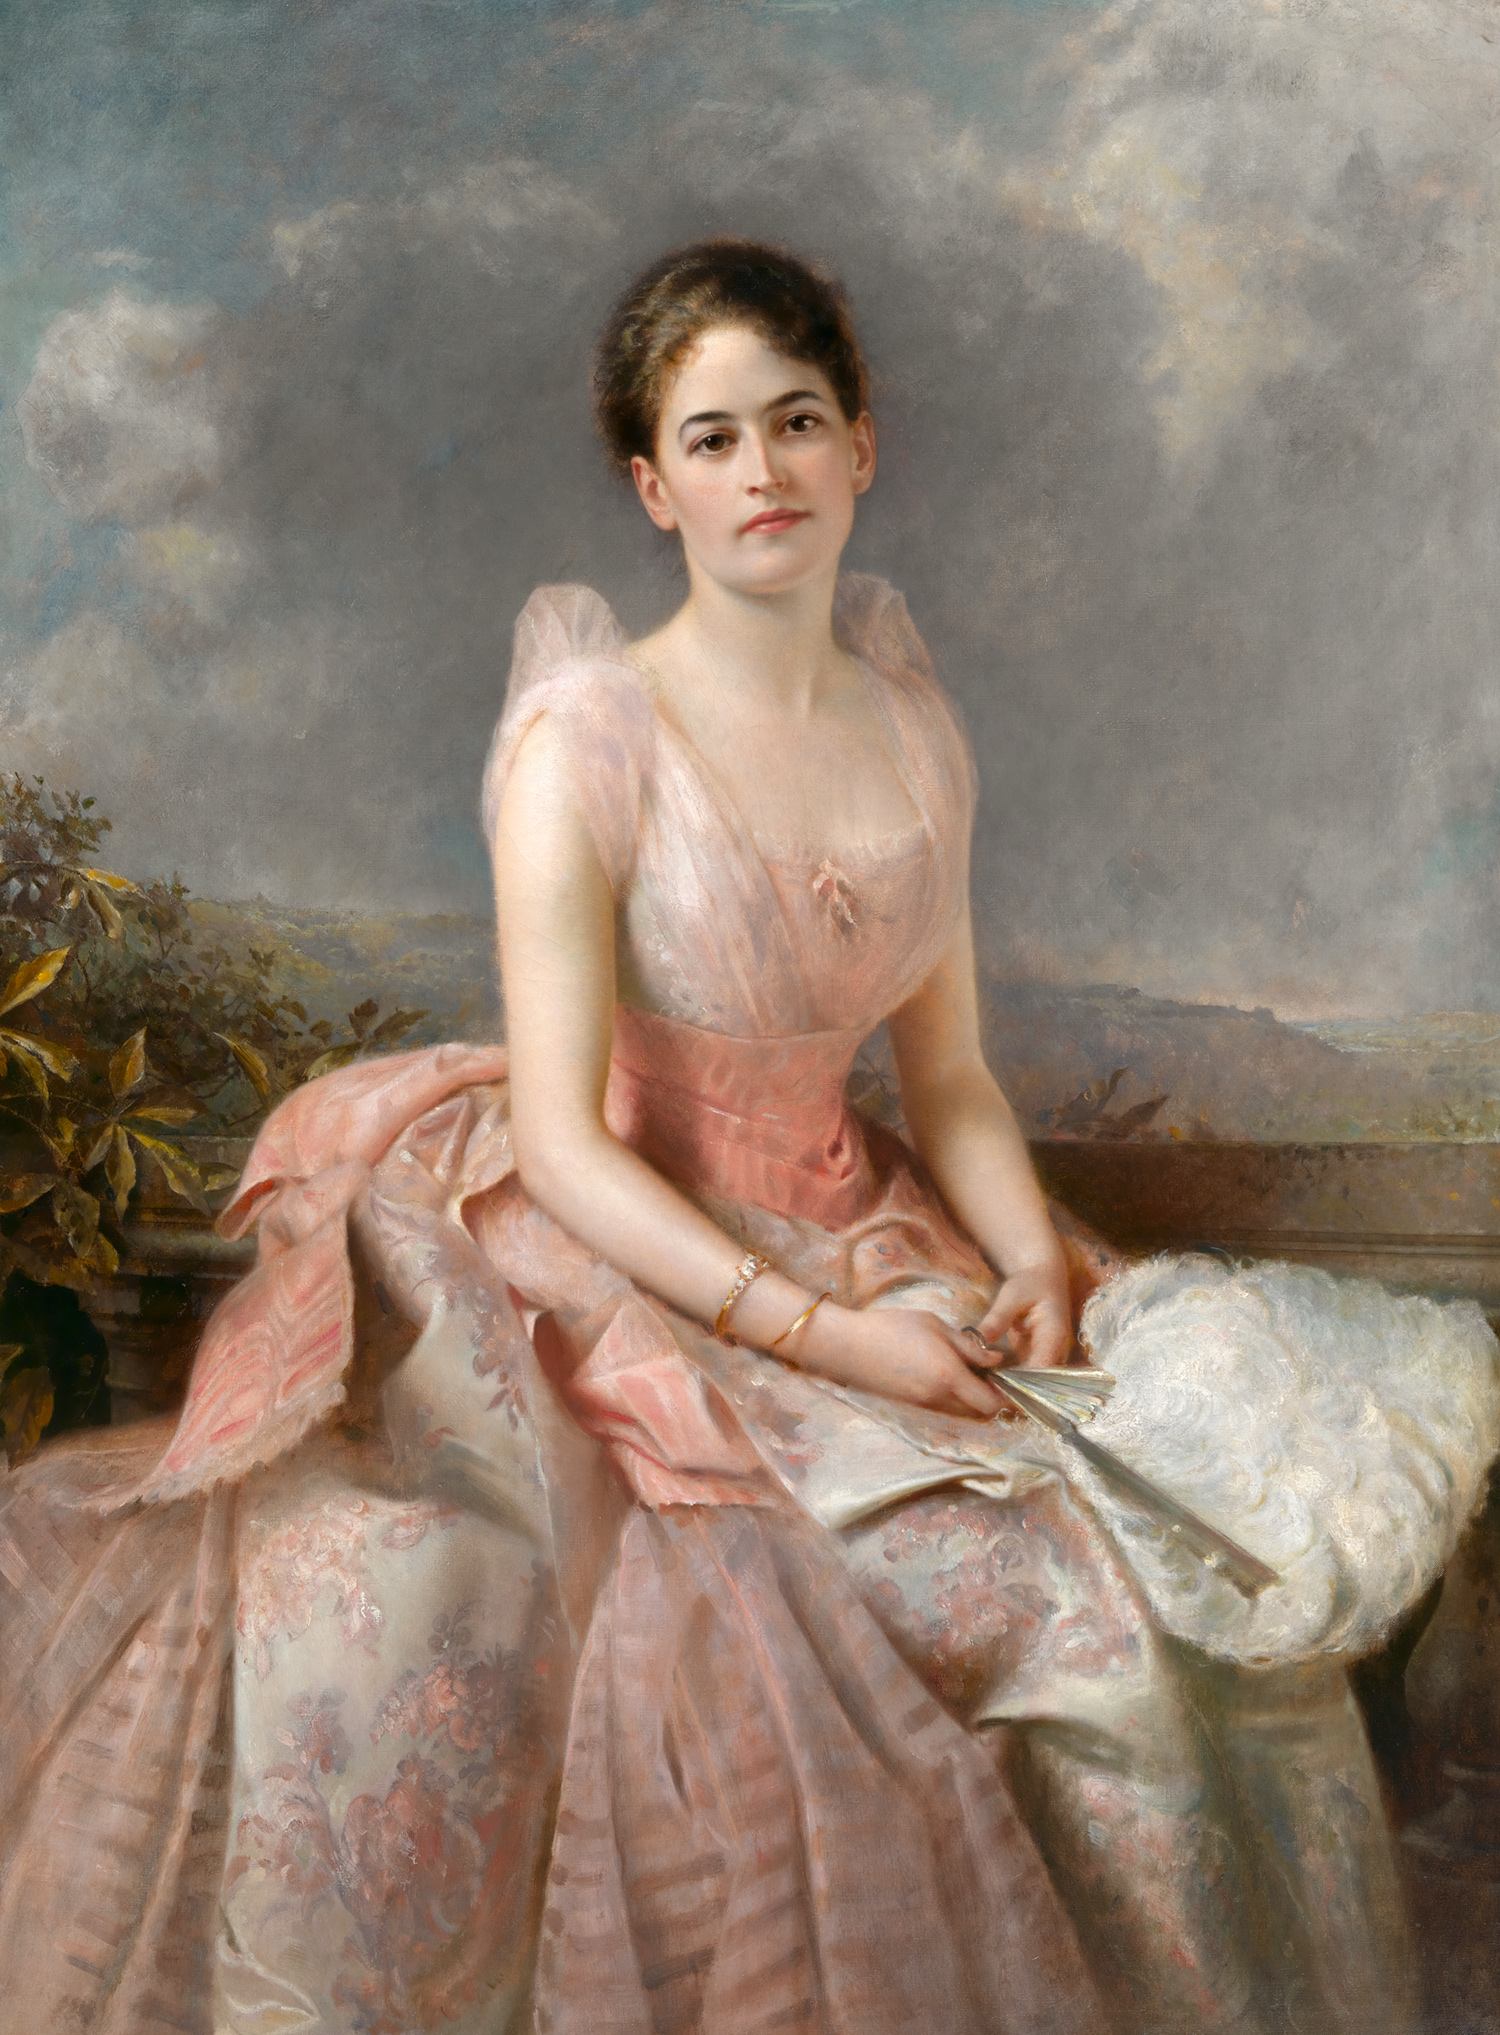 Juliette Gordon Low as a young woman, seated, wearing an elaborate, flowing silk dress and holding a feathered fan in her lap.